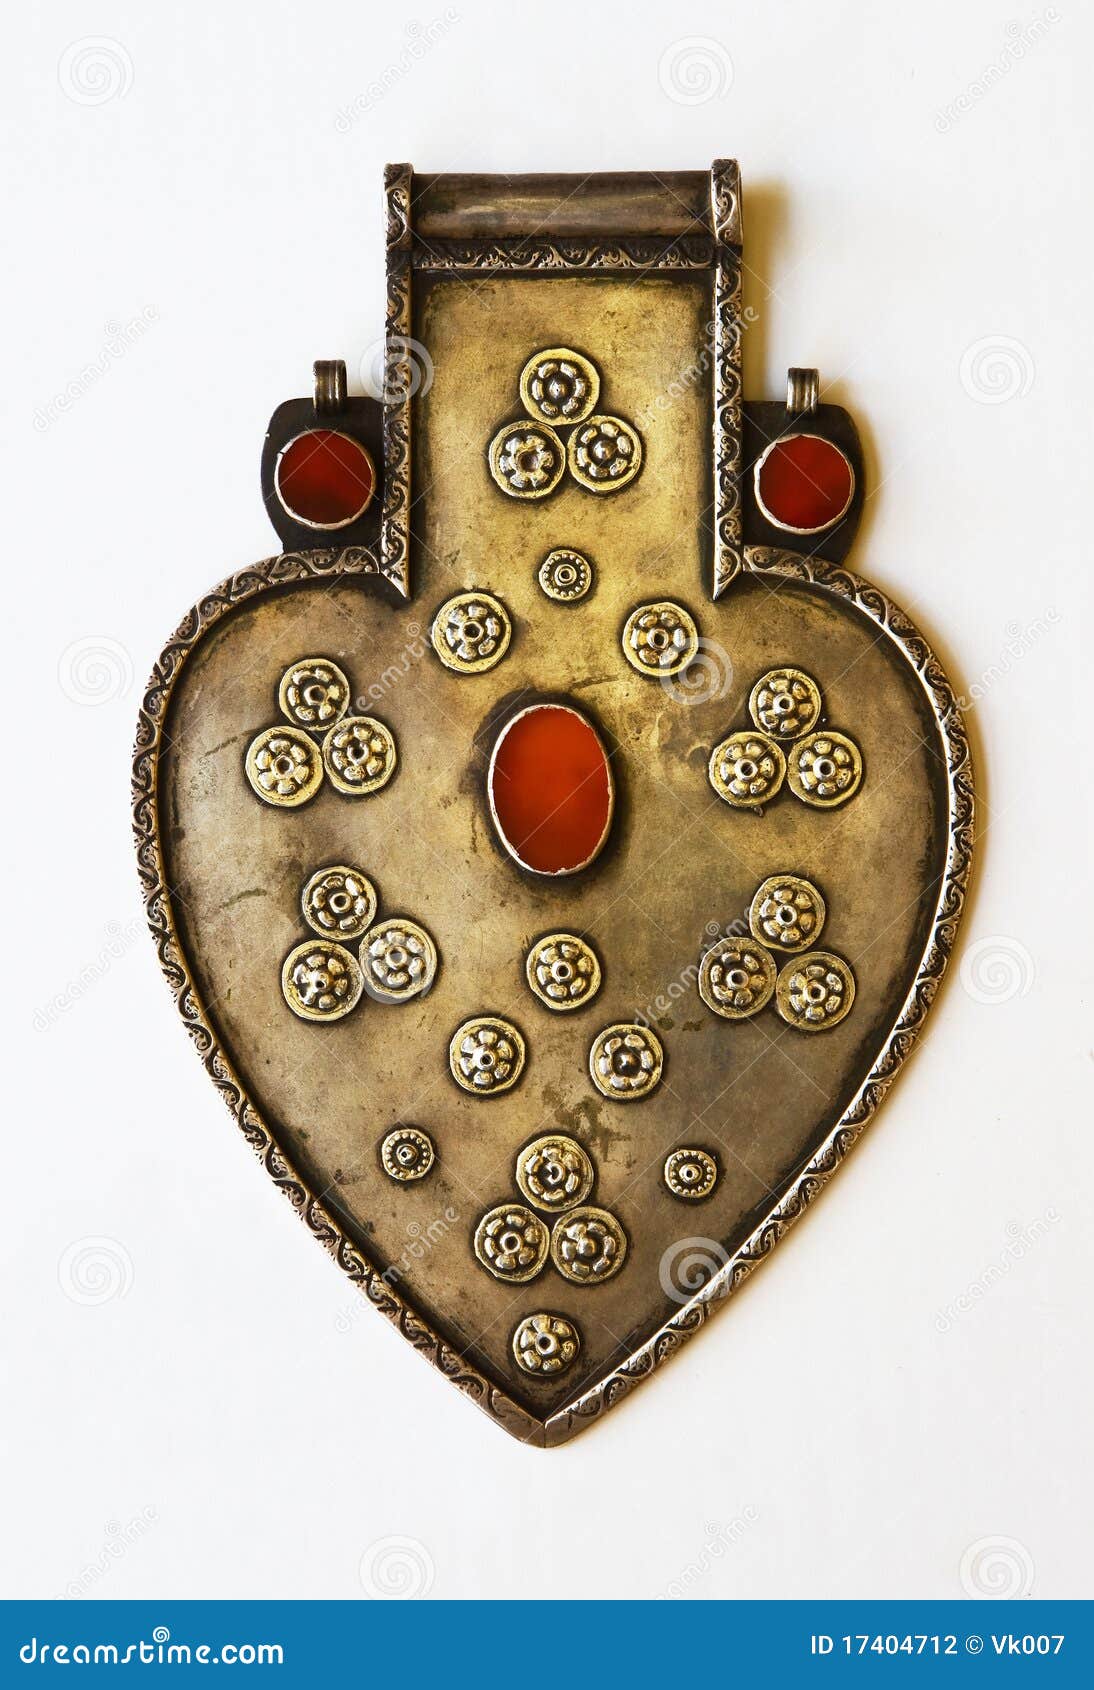 silver artifact in form of heart